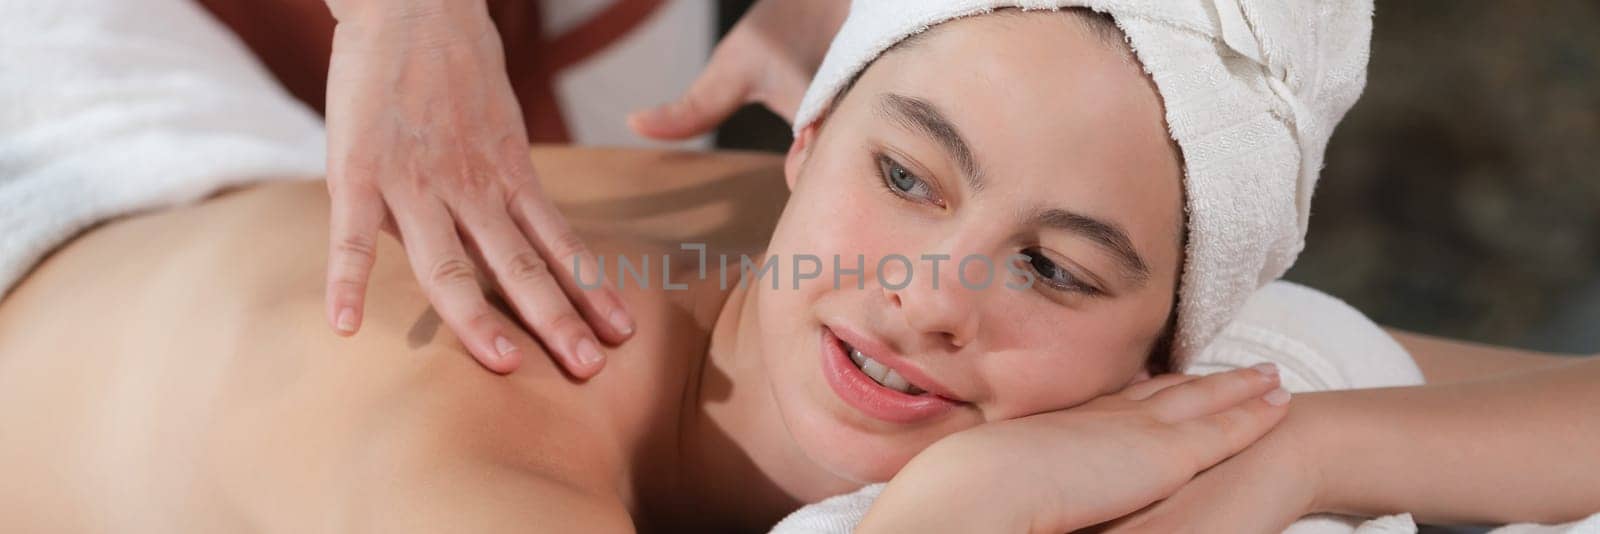 Beautiful young woman received a back massage on a spa bed from professional masseuse. Attractive female relaxes deeply by skilled hands of the massage therapist. Surrounded with nature. Tranquility.